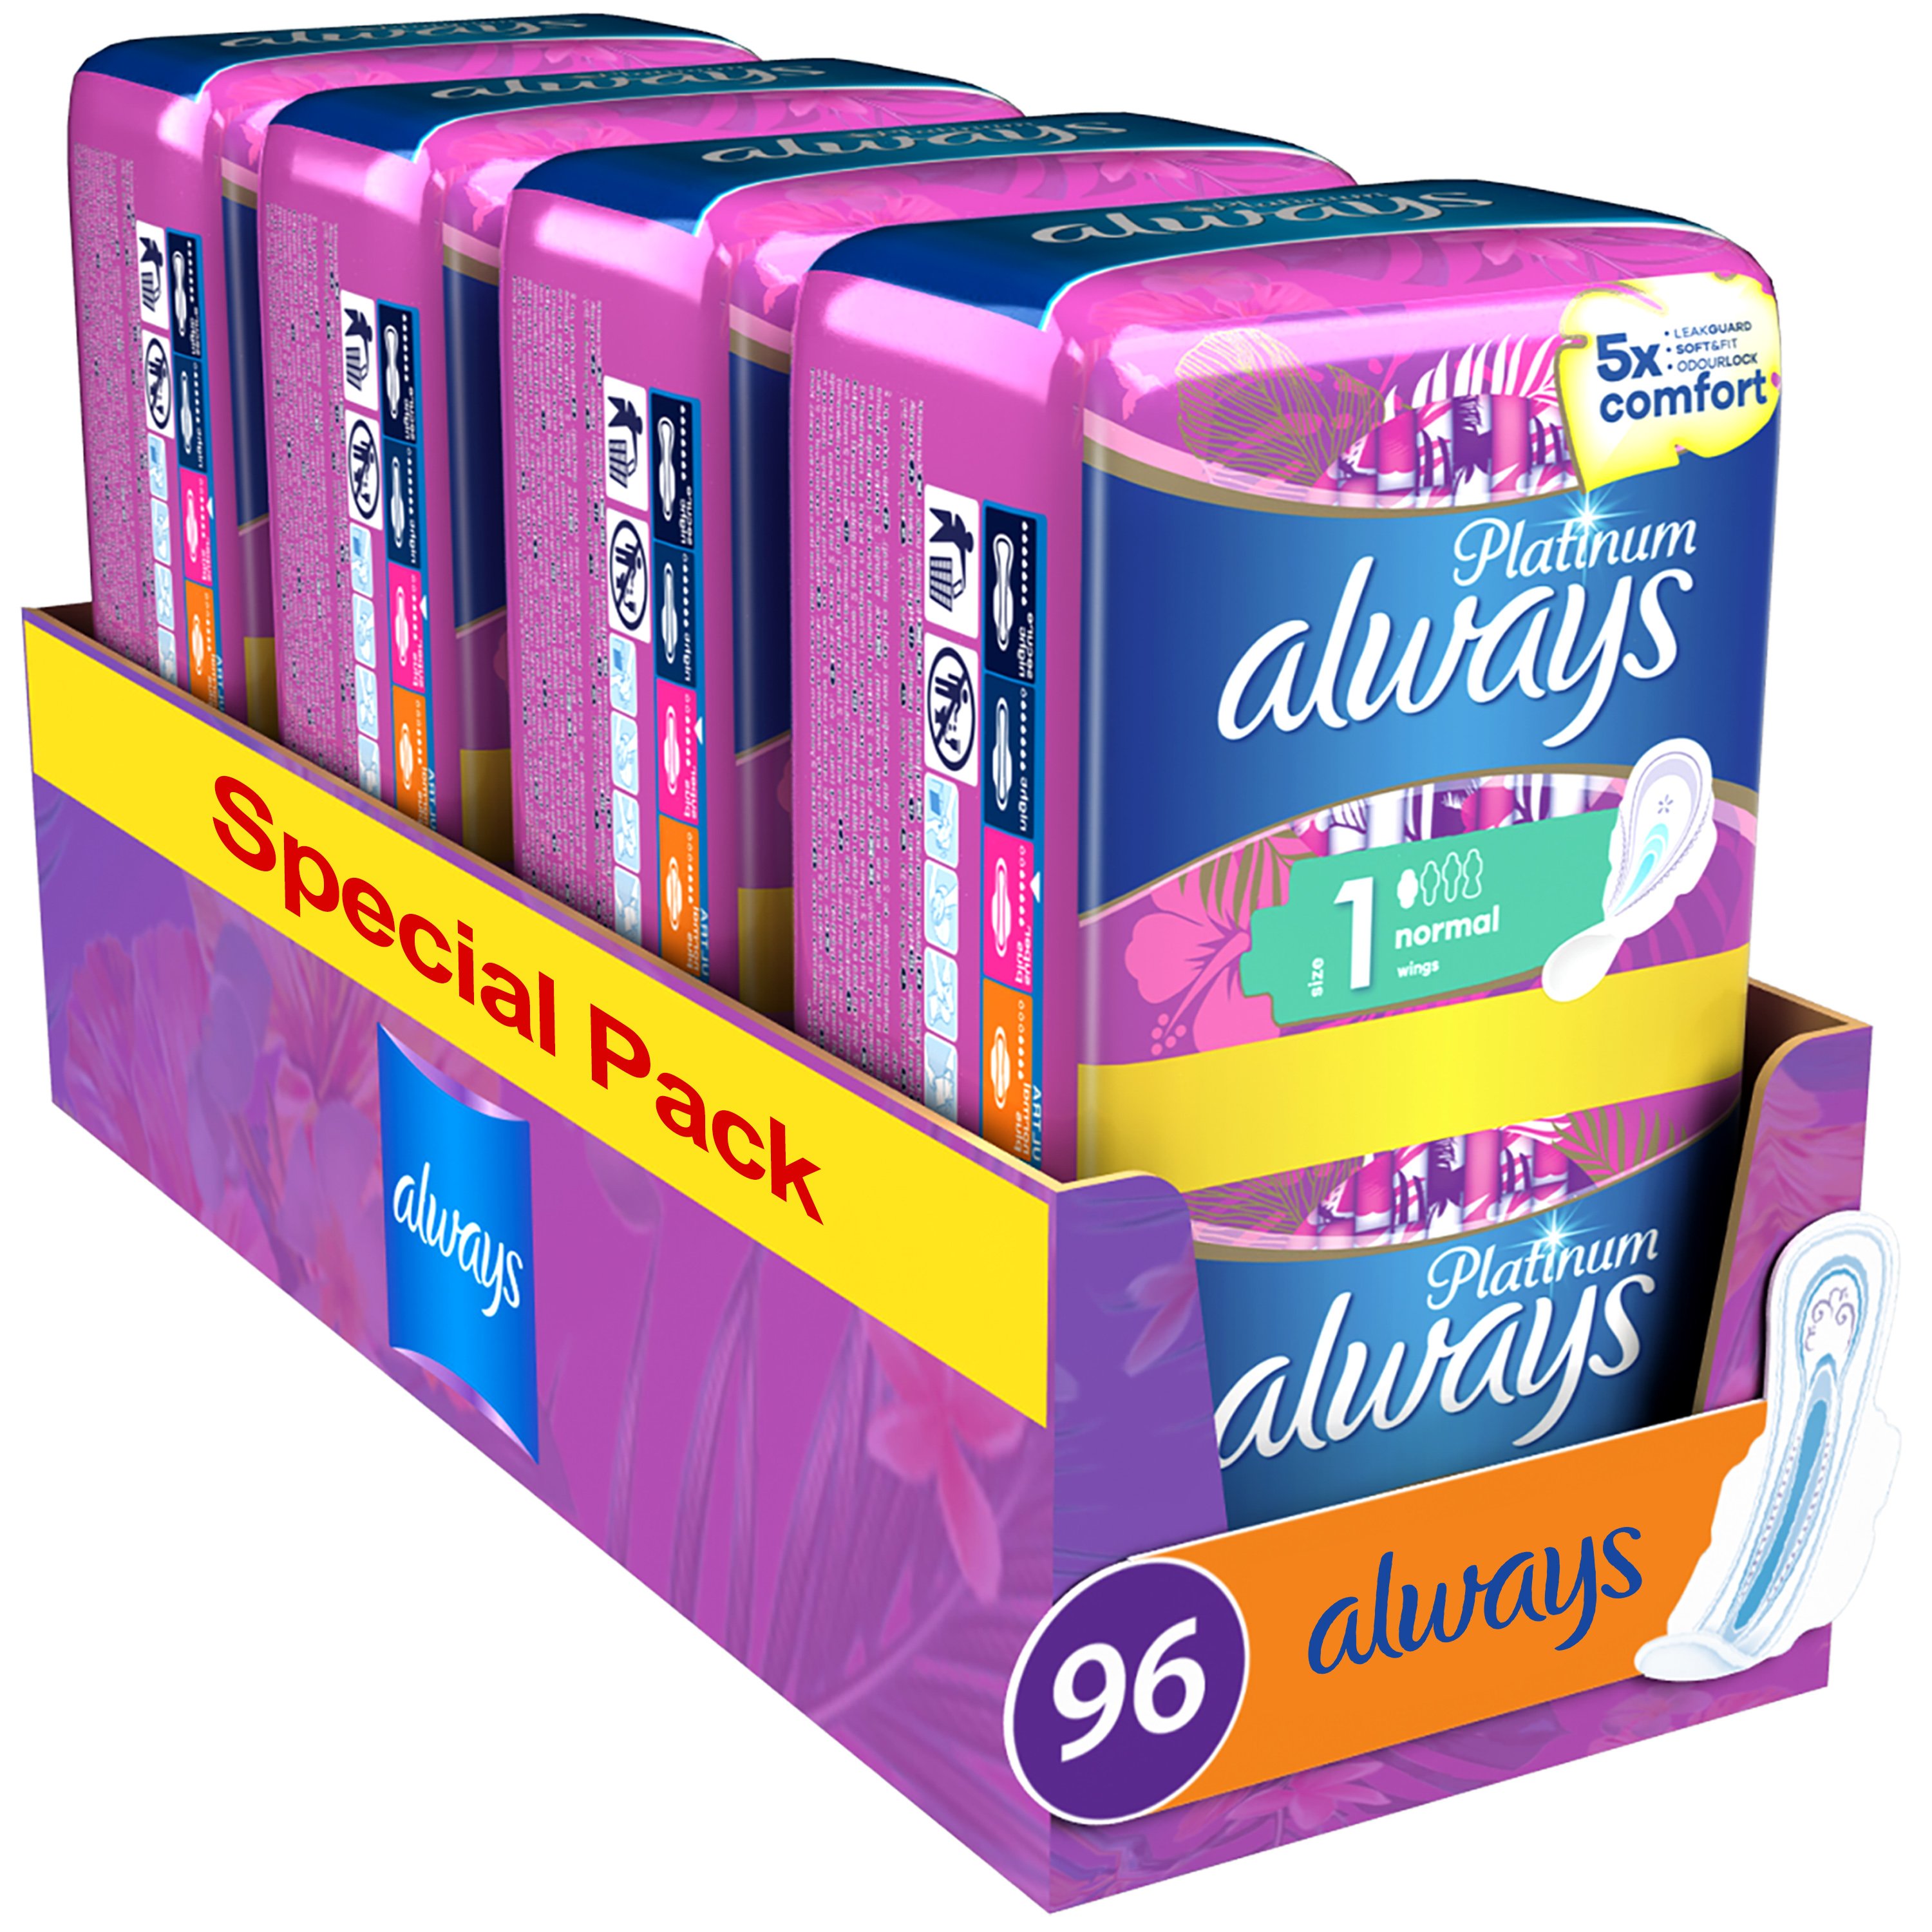 Always Promo Multi-Pack Platinum Normal Sanitary Towels with Wings Σερβιέτες με Φτερά για Πενταπλάσια Άνεση & Προστασία Size 1, 96 Τεμάχια